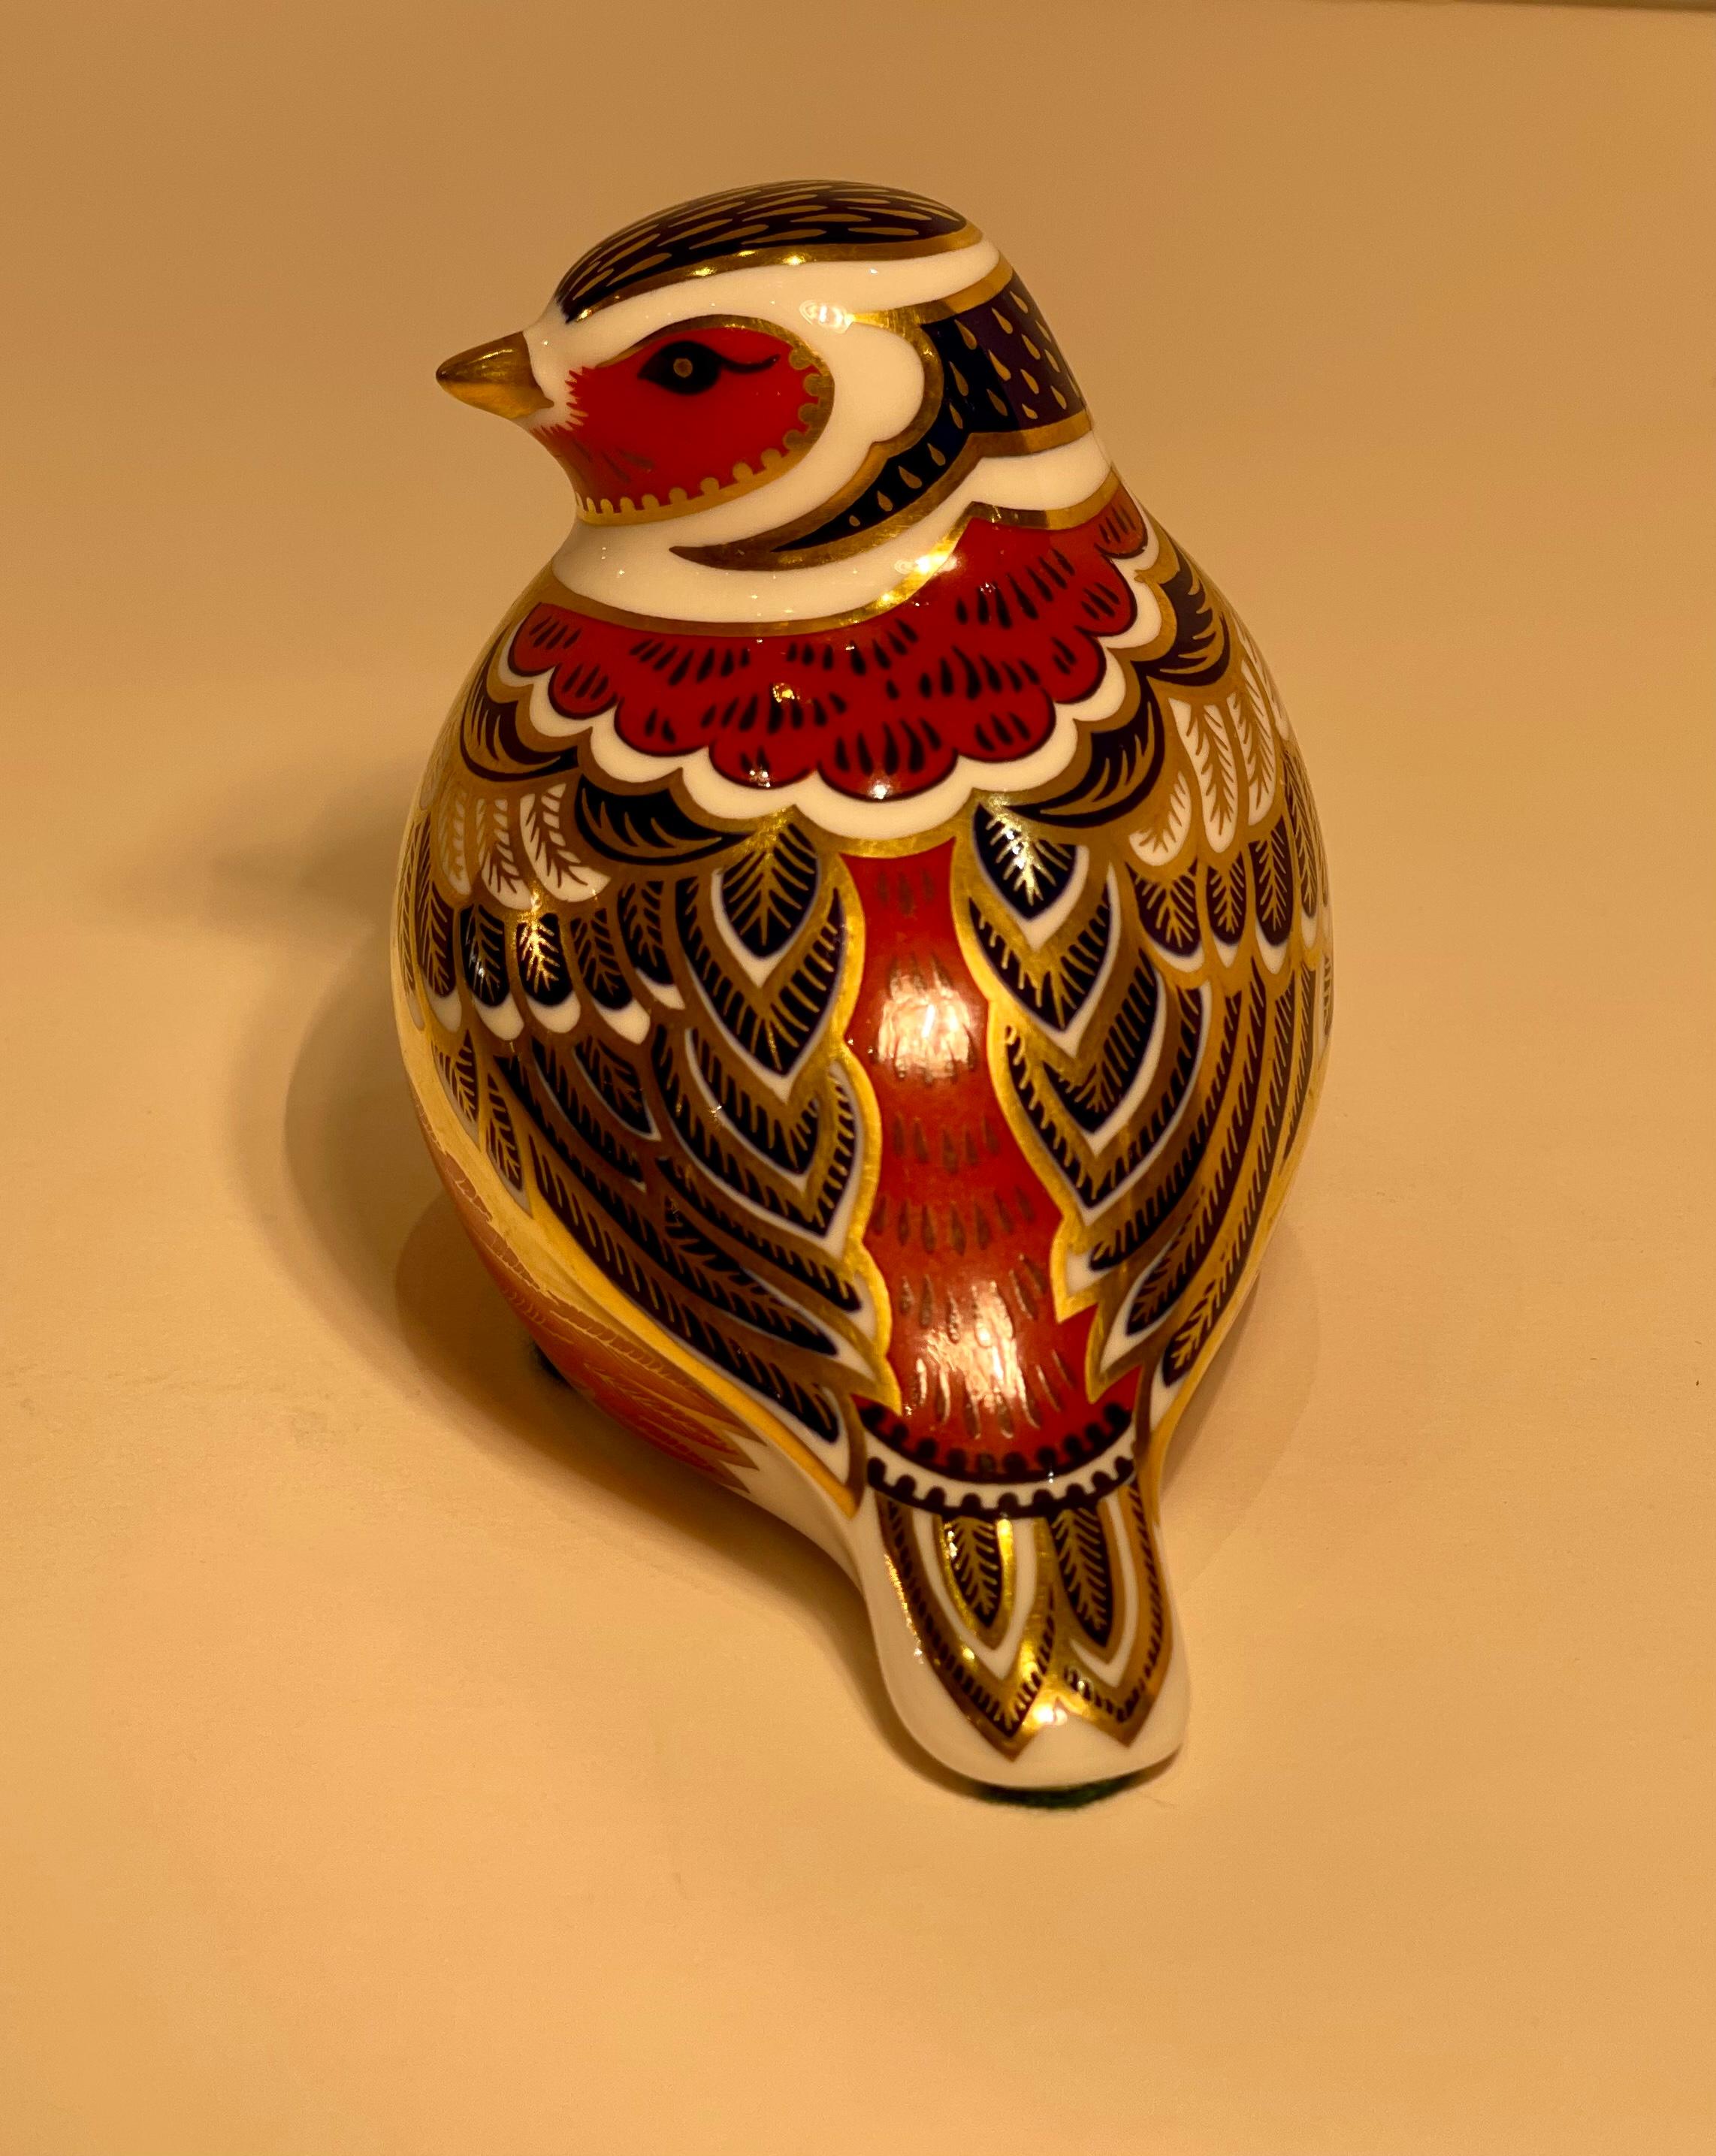 Very collectible, hand-made and hand-painted in England, retired Royal Crown Derby Fine bone china bird figurine or paperweight. The bird is richly decorated in rust, cobalt blue and accented with 22k gold in the famous Japonisme style Imari pattern